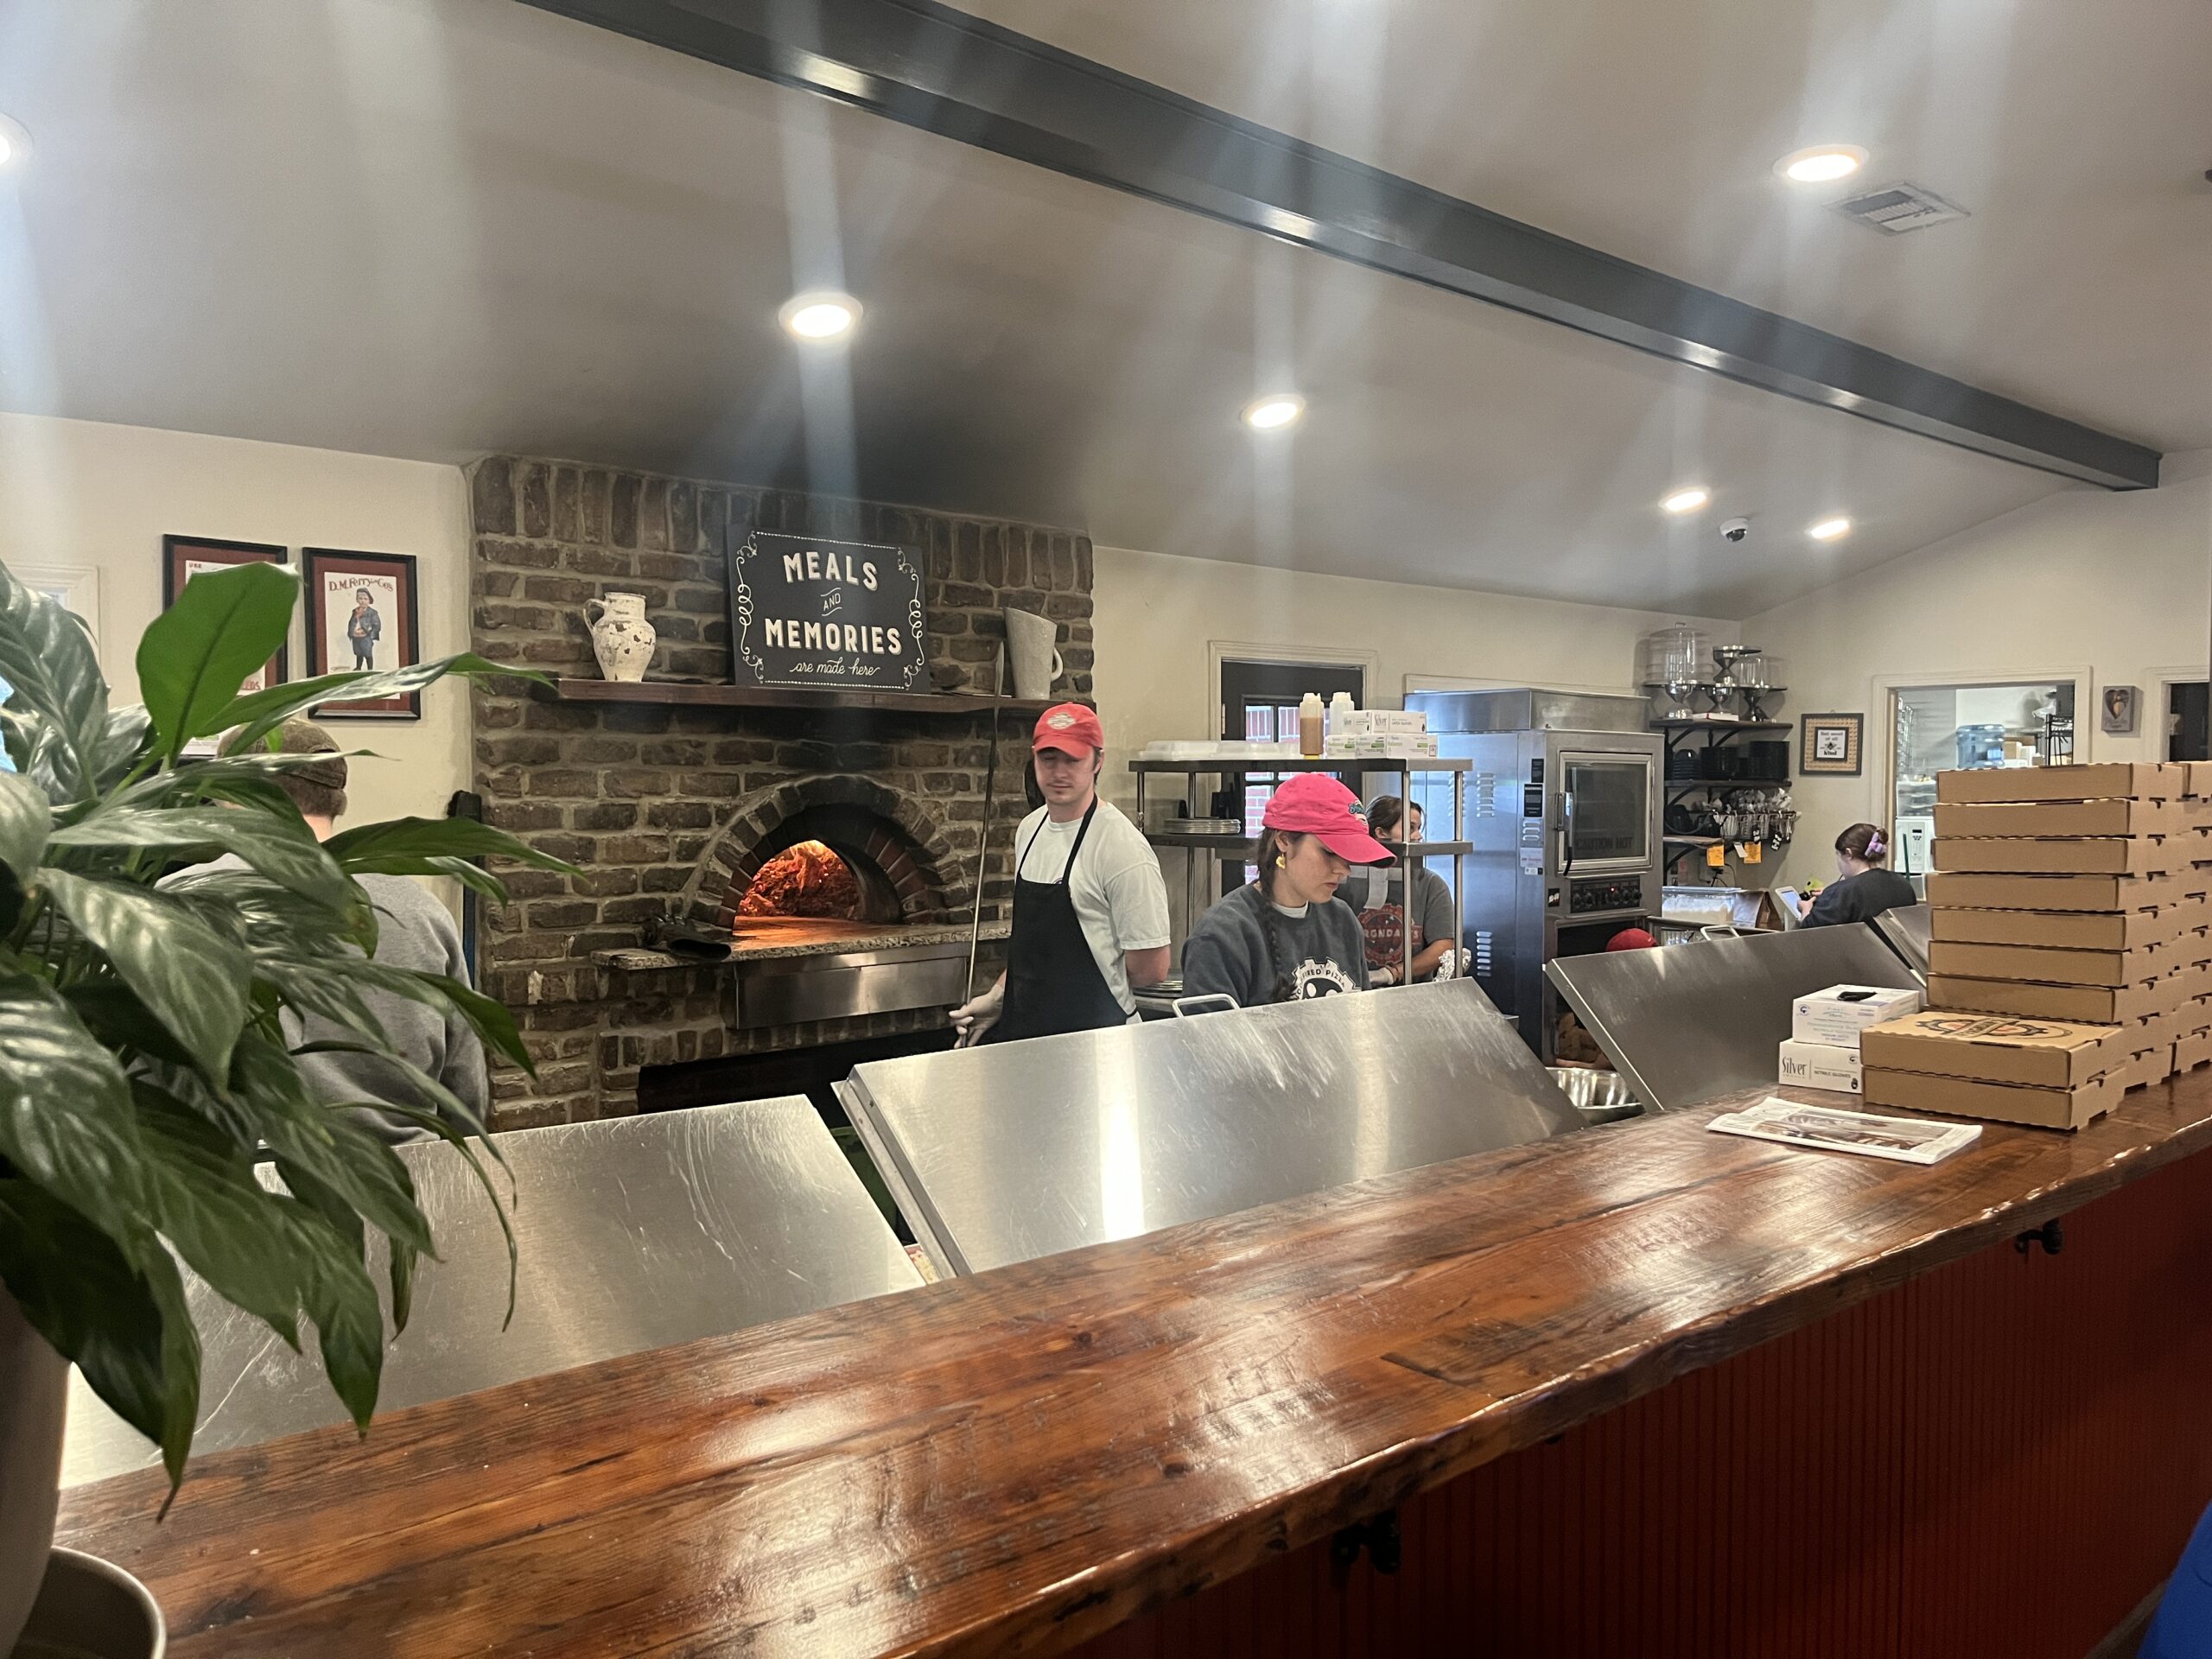 Great Wood-Fired Pizzas at Oxford’s Fergndans